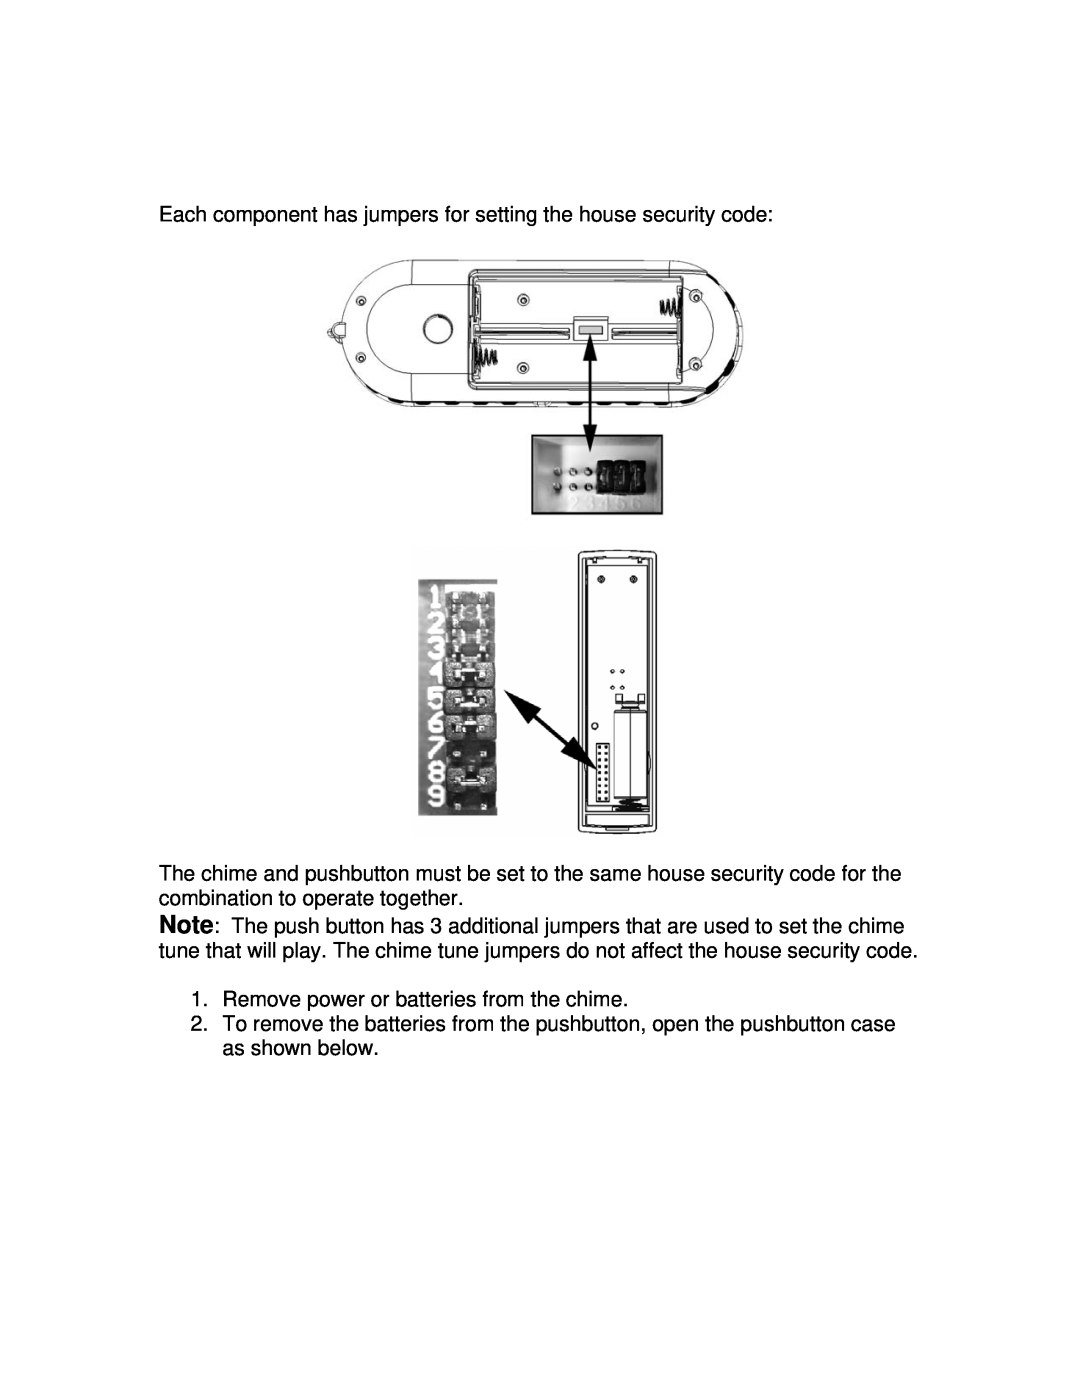 Jasco 19200 installation instructions Remove power or batteries from the chime 